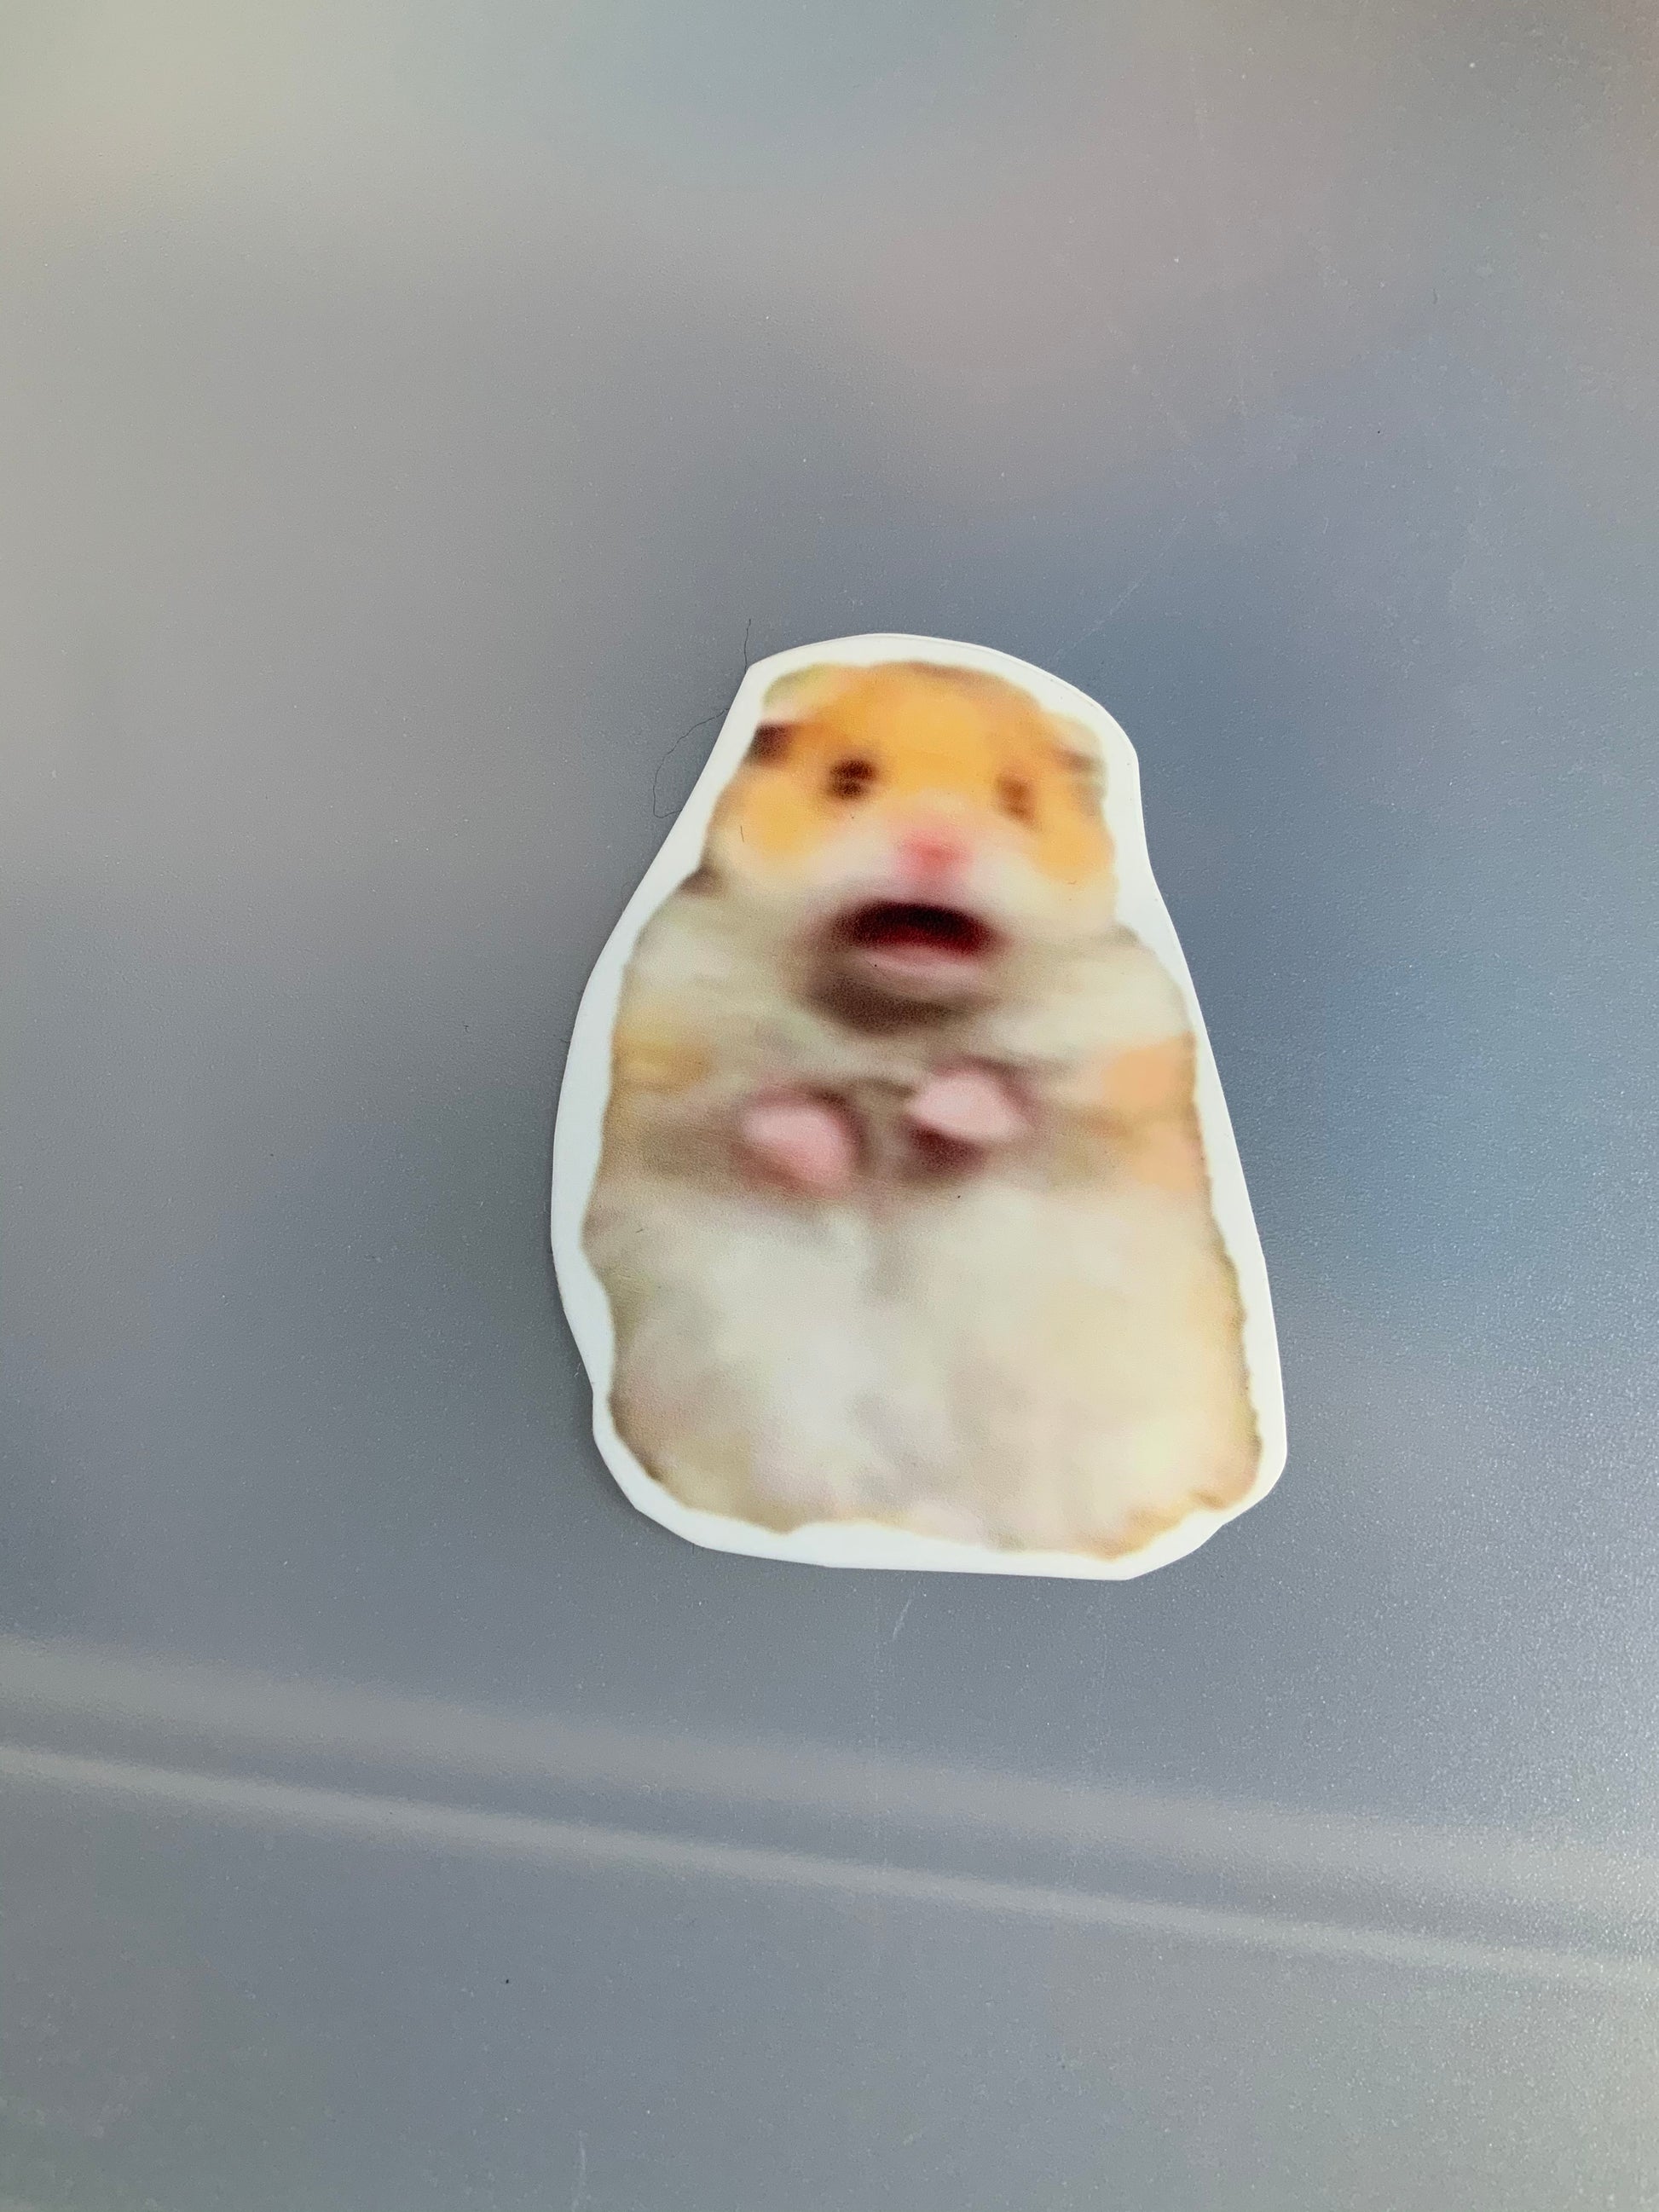 Scared hamster meme: Where did it actually come from and is it real?